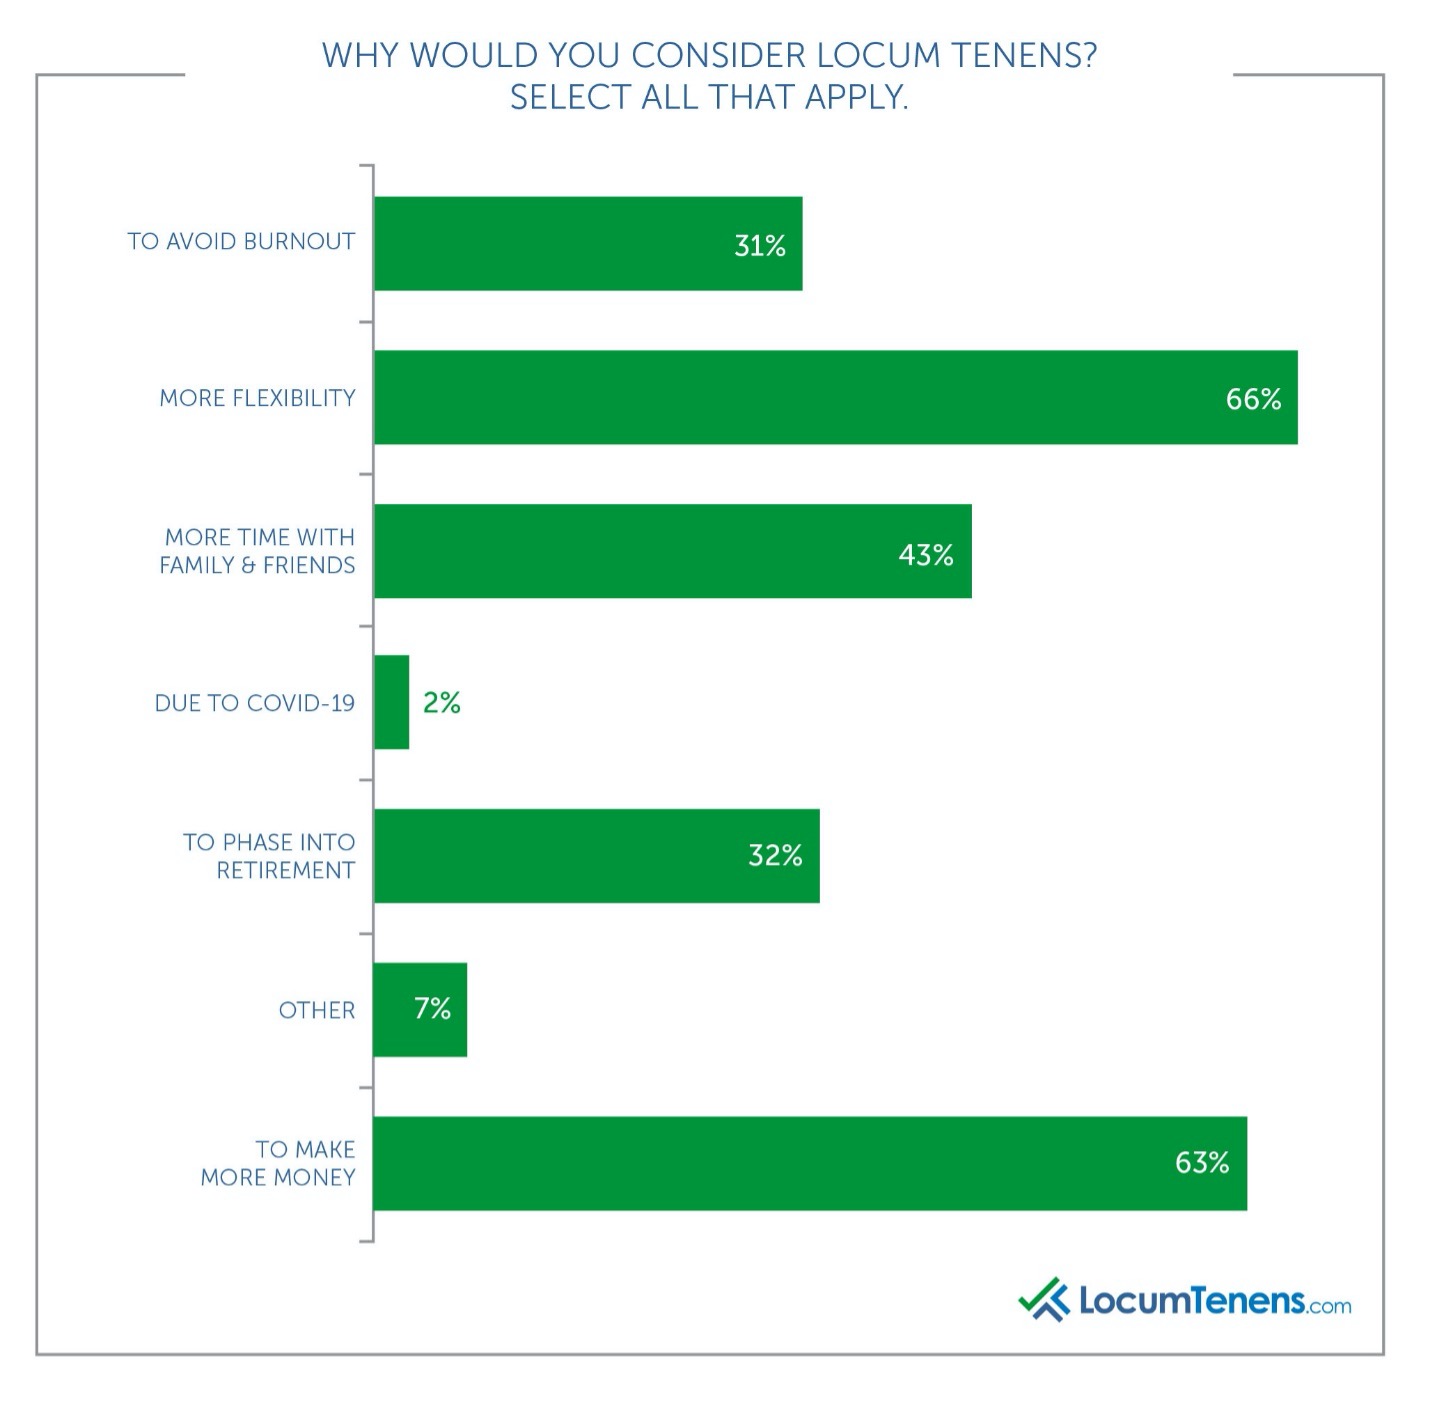 Why would you consider locum tenens?